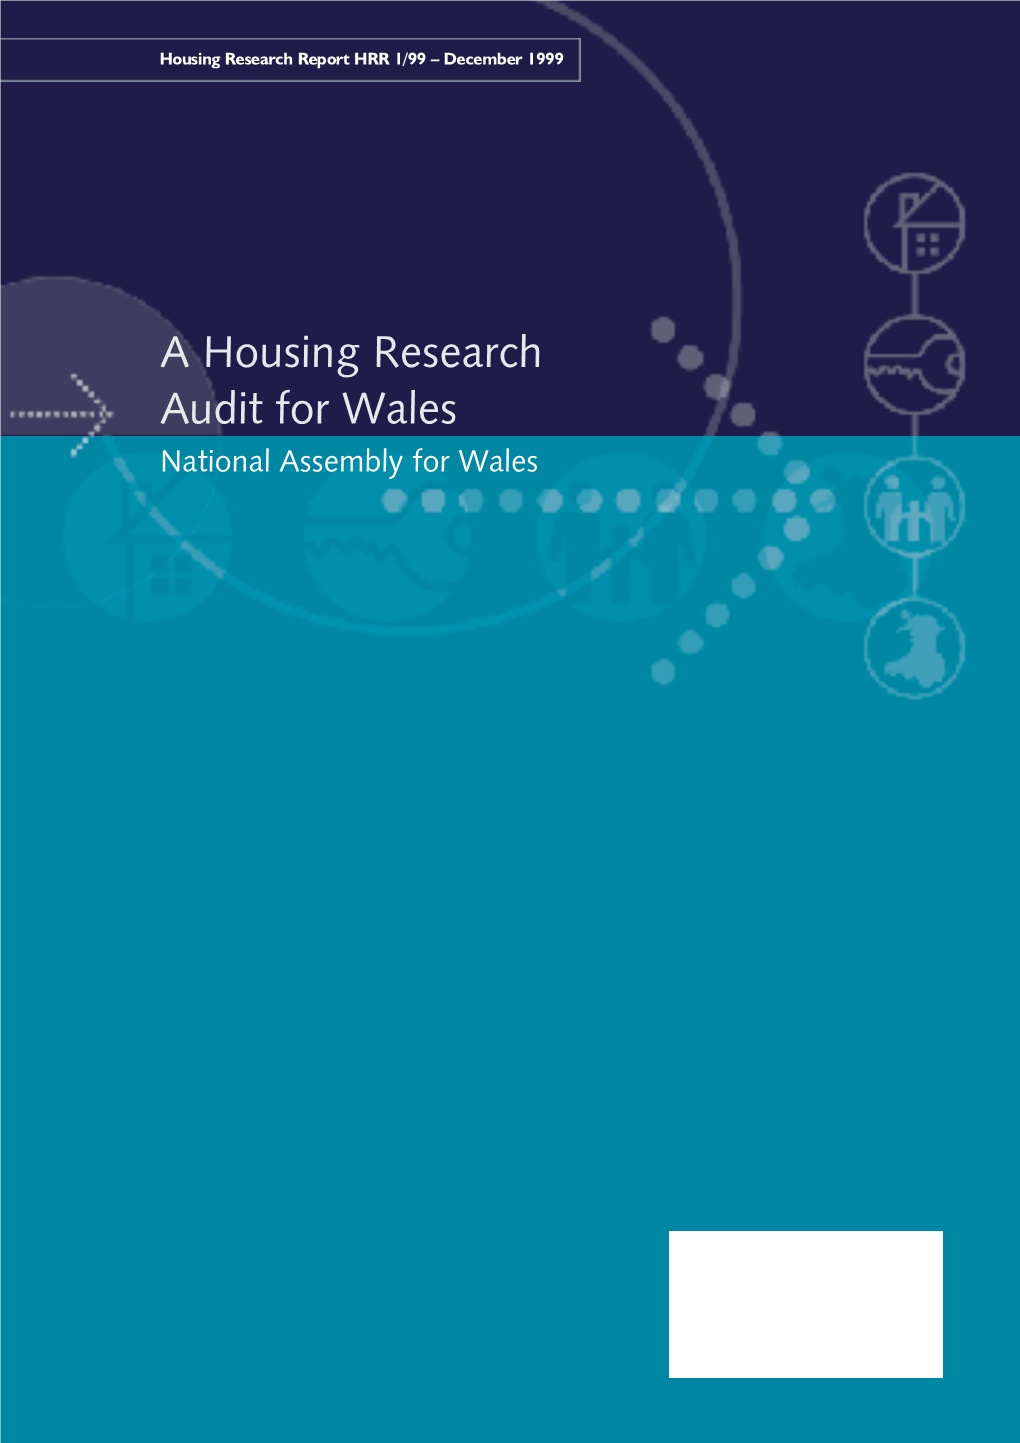 A Housing Research Audit for Wales National Assembly for Wales Further Copies of This Document Can Be Obtained Free of Charge From